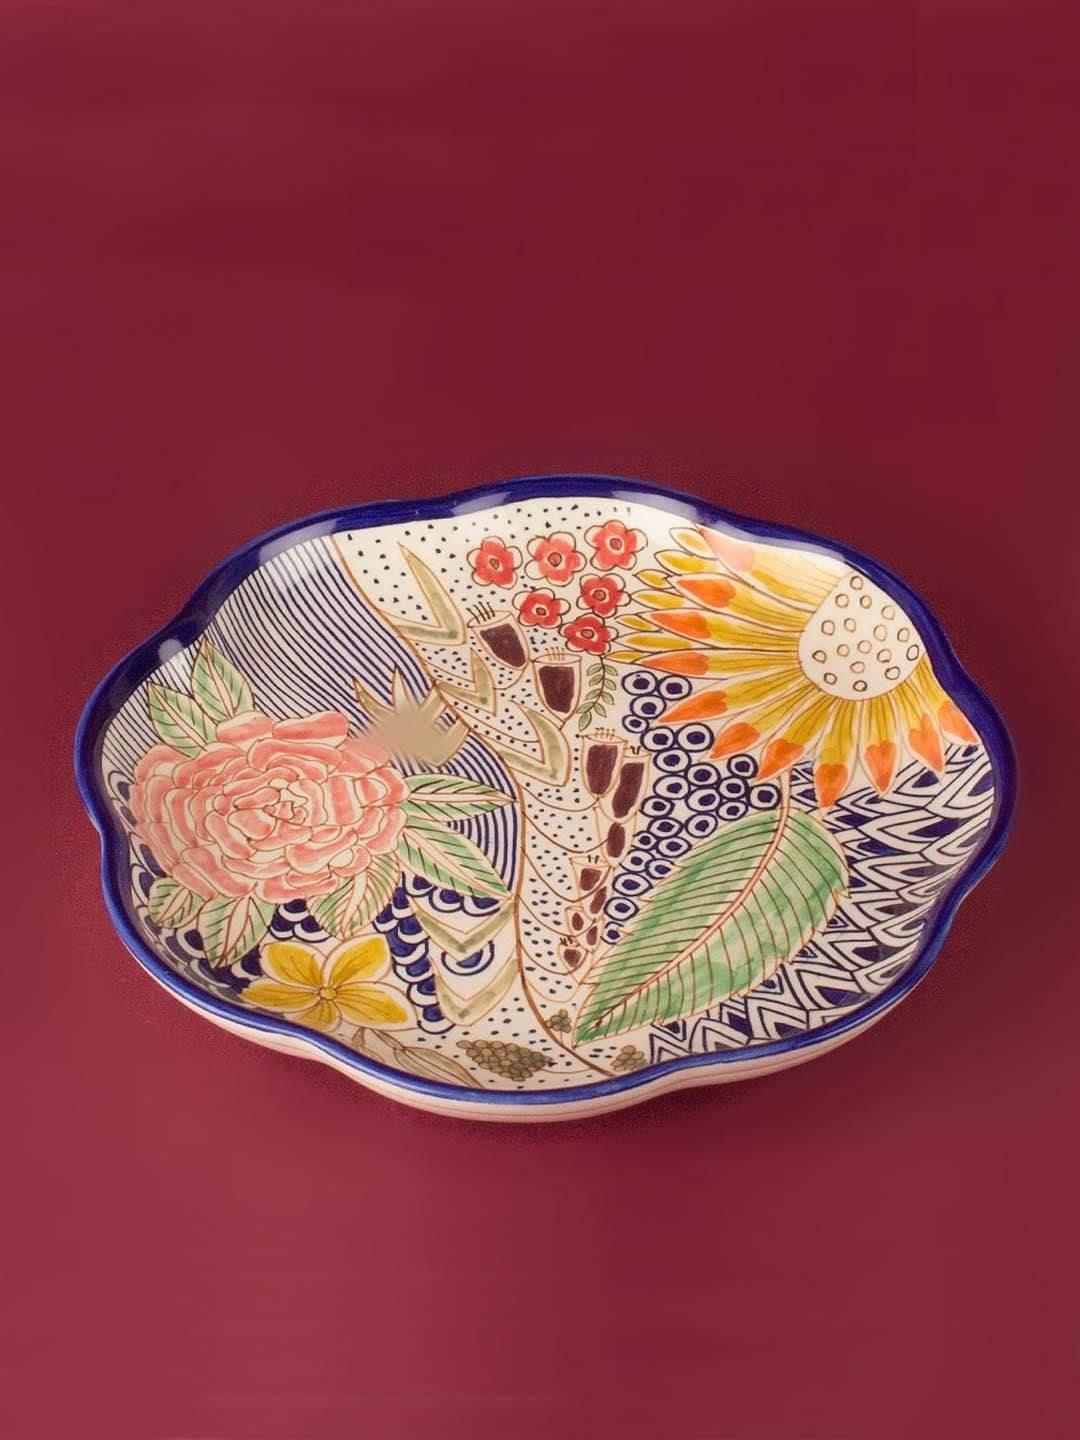 Secret Garden Chip & Dip Tray With BowlMaterial: 100% Stoneware
Dimensions: Tray-1.4 H Inch x 11.75 D Inch. Bowl- 1.5 H Inchx 4.5 D Inch

Dishwasher safe, Microwave safe,Do not scrub with steel wool. WillSecret Garden Chip & Dip TrayThe Wishing Chair